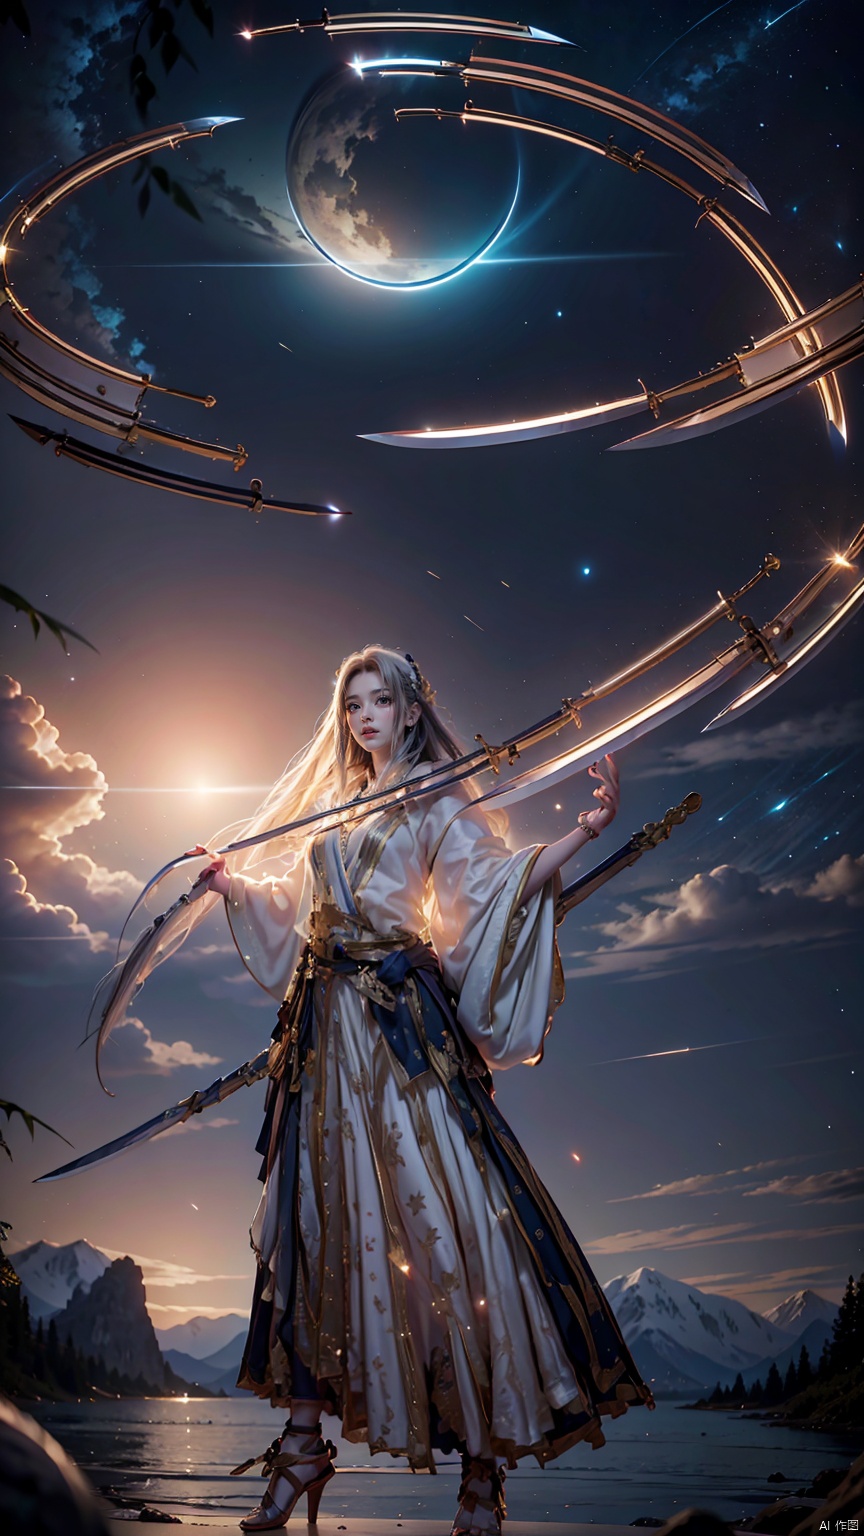  1 girl, solo, white long hair, female focus: strengthening, (Full Body: 1.2), (Floating Swords * 100), 100 Floating Swords, lens light, Shadow of the Swords (Blade Storm: 1.2), circular waves, Night, cliffs, starry sky, clouds, mountains and rivers, ambient samples, Starry Night, Absorption, Incremental Absorption, Beyond Reality, (Masterpiece) ECE, (Very Detailed CGUnit 8K Wallpaper), Best Quality, High Resolution Illustrations,